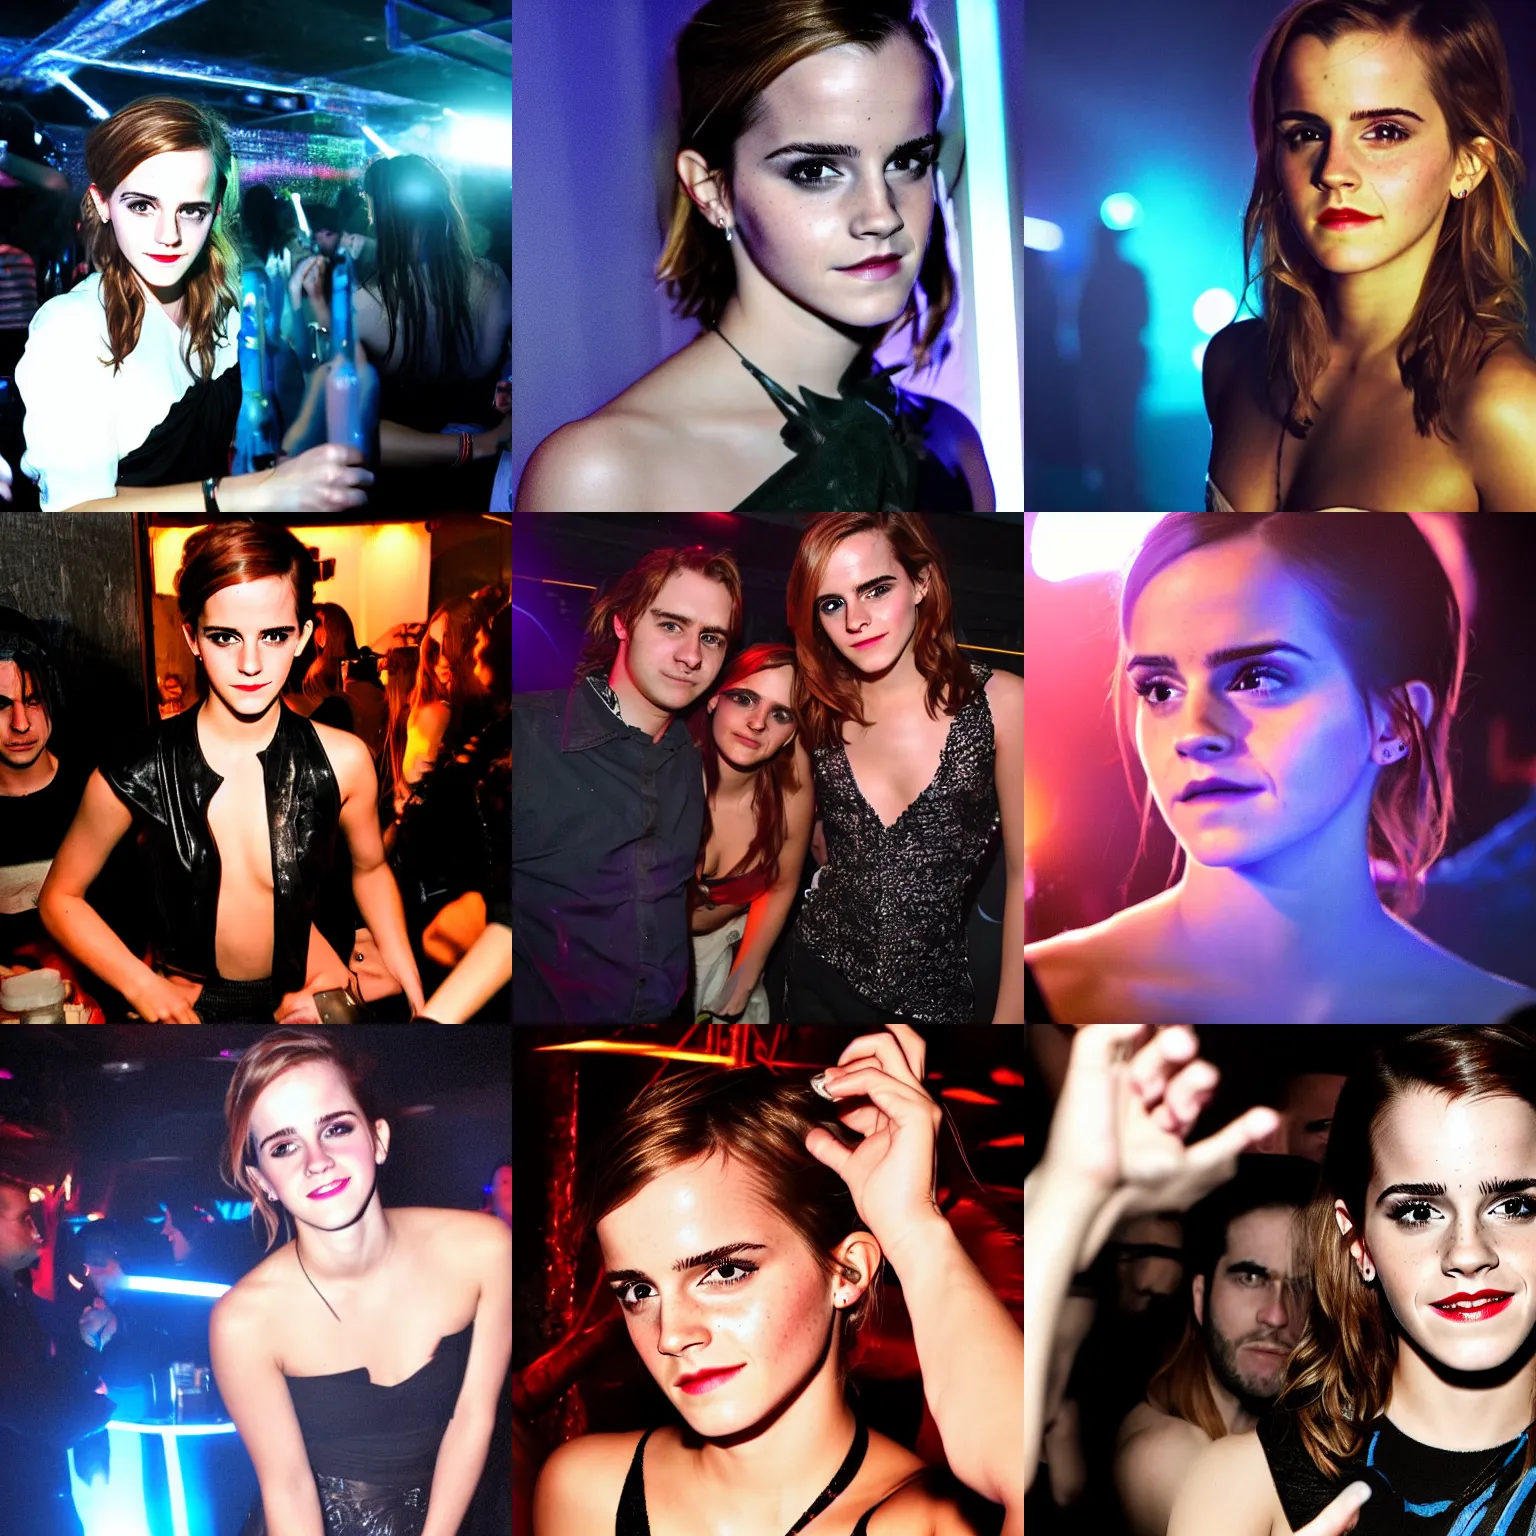 A photo of Emma Watson partying in the nightclub. | Stable Diffusion ...